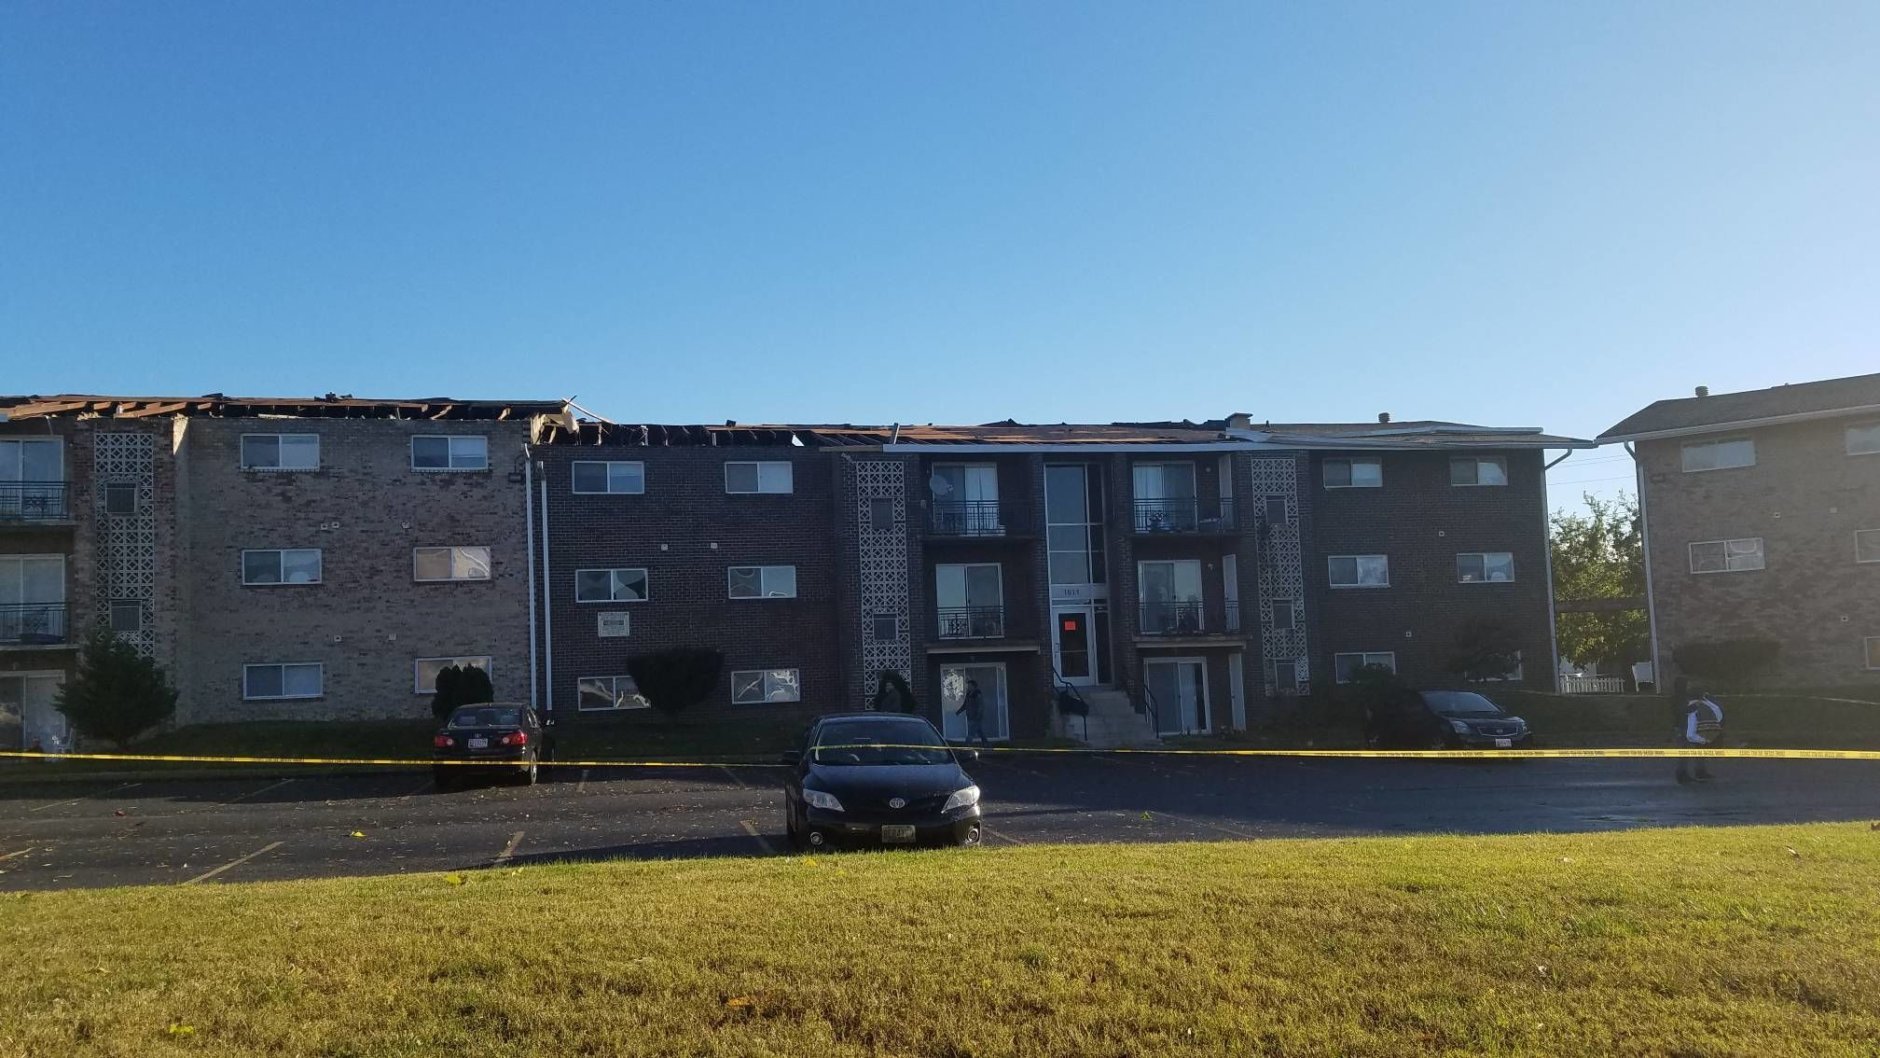 Sixty-four people are displaced when the roof of an apartment building in Dundalk, Maryland, blew off during a storm on Friday, Nov. 2, 2018. (Courtesy Baltimore County Fire Department)